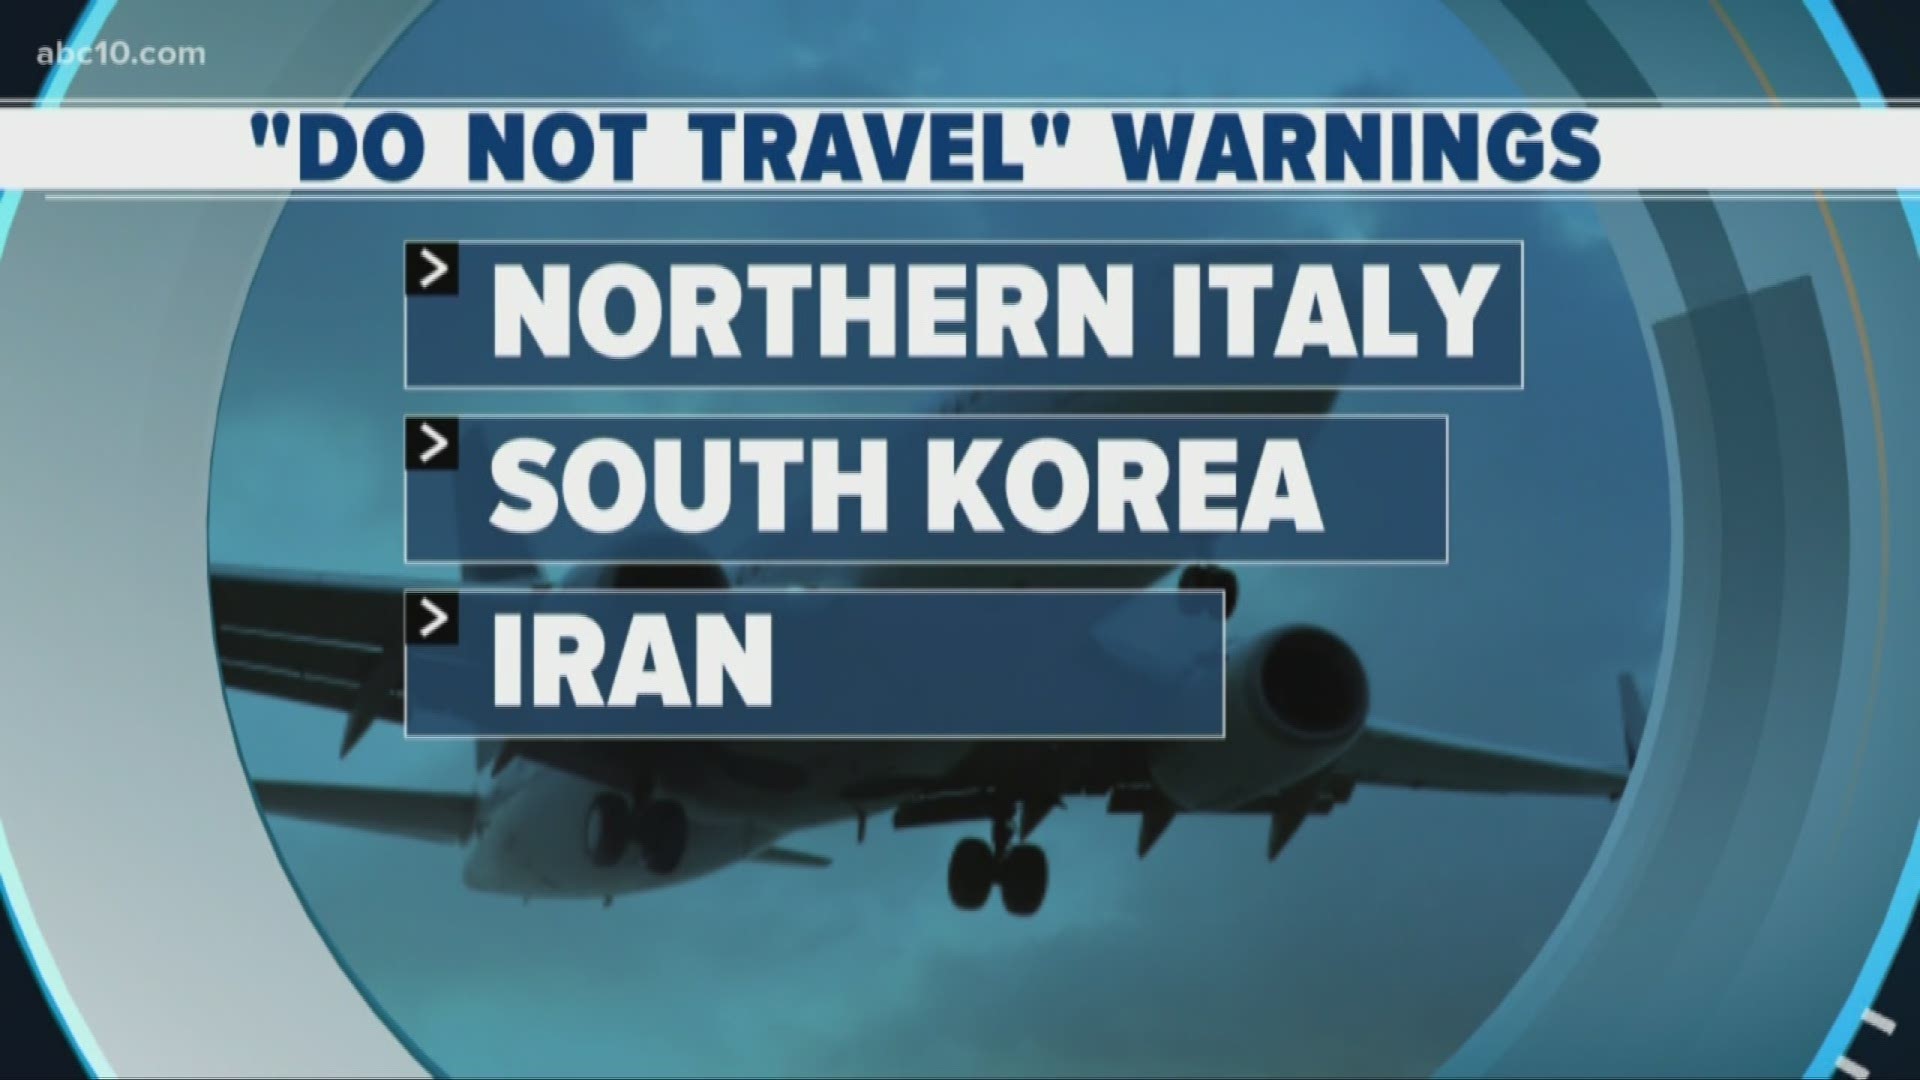 The White House is now urging Americans to cancel travel plans to Northern Italy and South Korea. Several airlines are now suspending flights & waiving cancel fees.